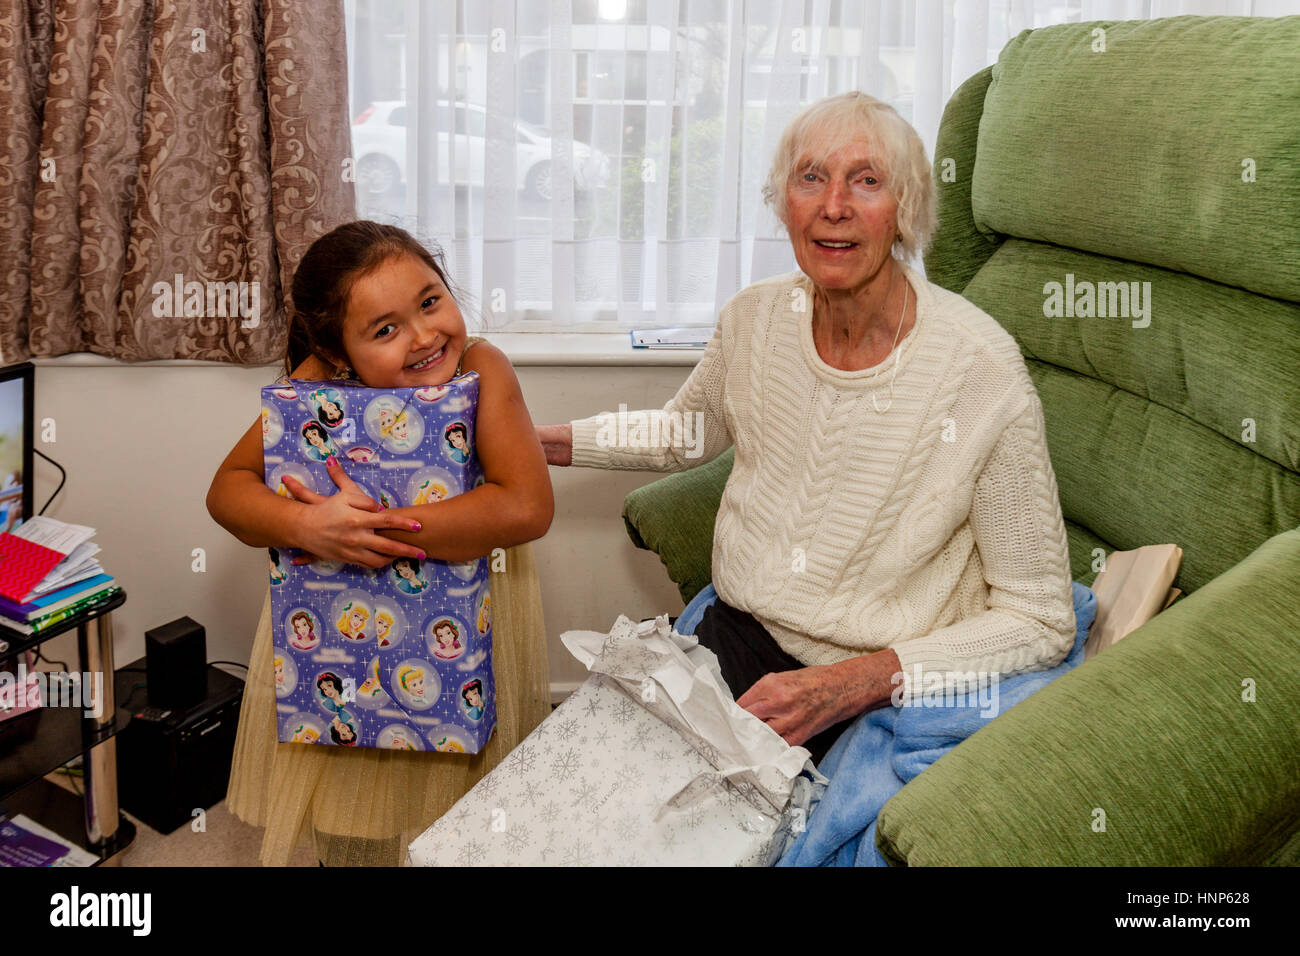 A Mixed Race Child and Her Grandmother Opening Presents On Christmas Day, Sussex, UK Stock Photo